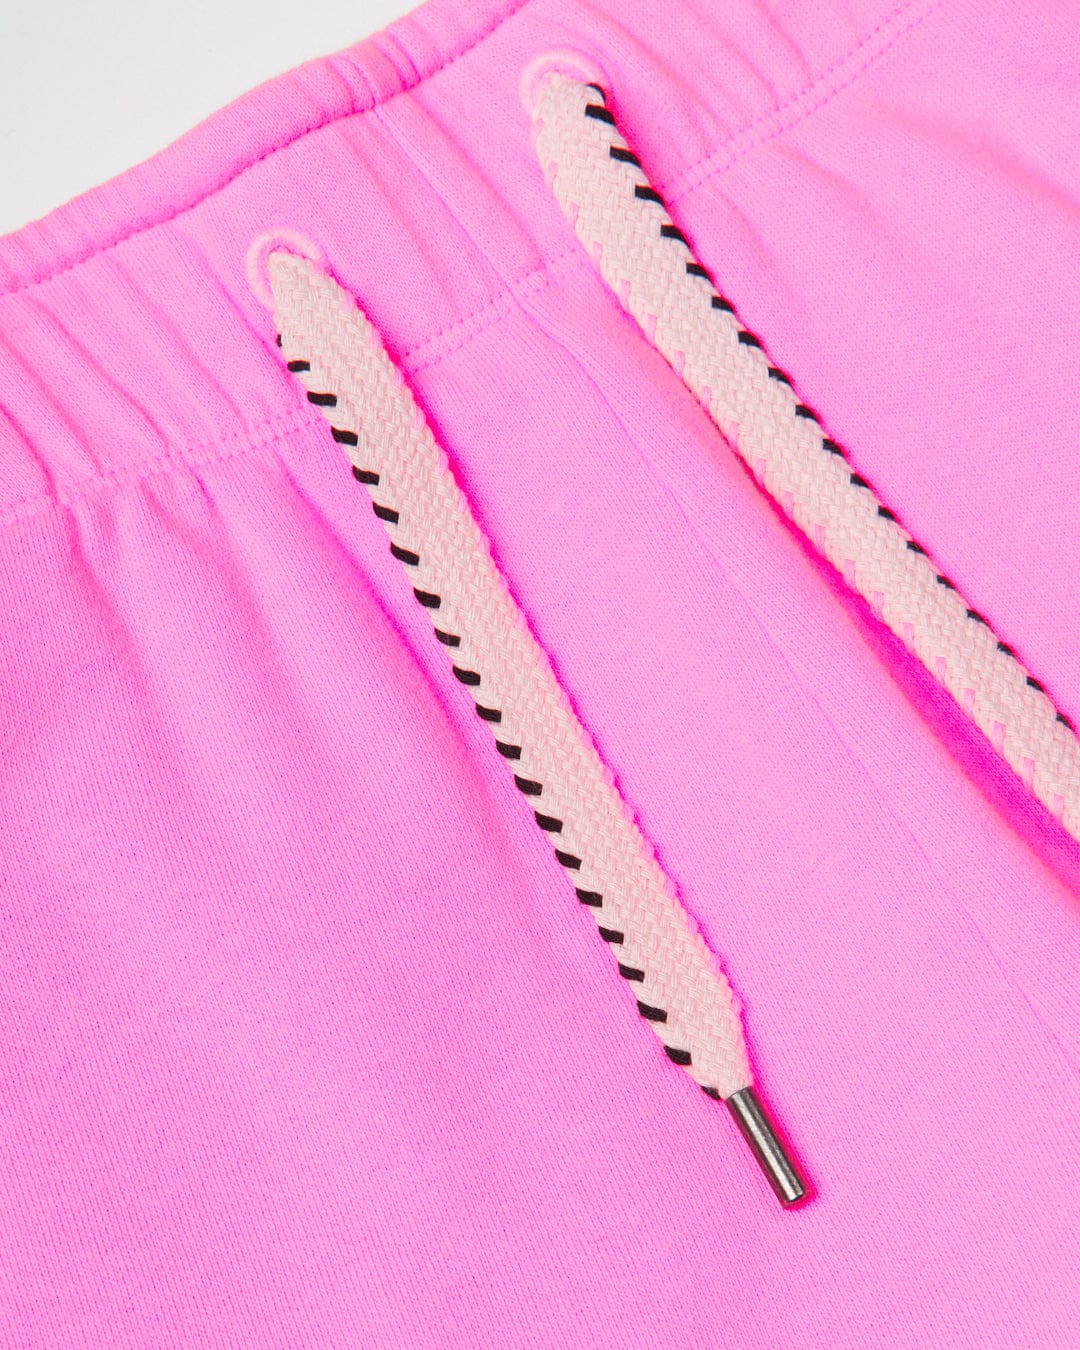 Close-up of a pink Saltrock Instow branded fabric with a white and black drawstring, emphasizing the texture and details of the material and cord ends.